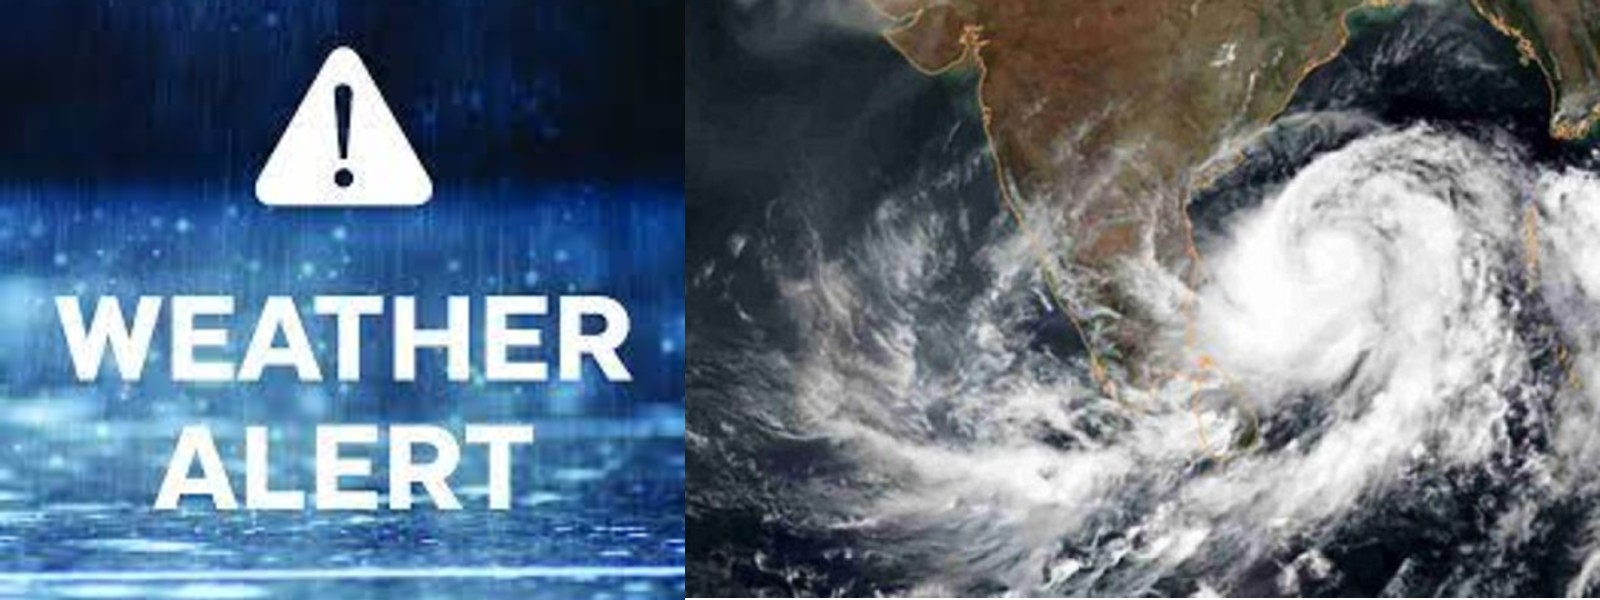 Cyclone Yaas To Intensify Into “Very Severe Cyclonic Storm”